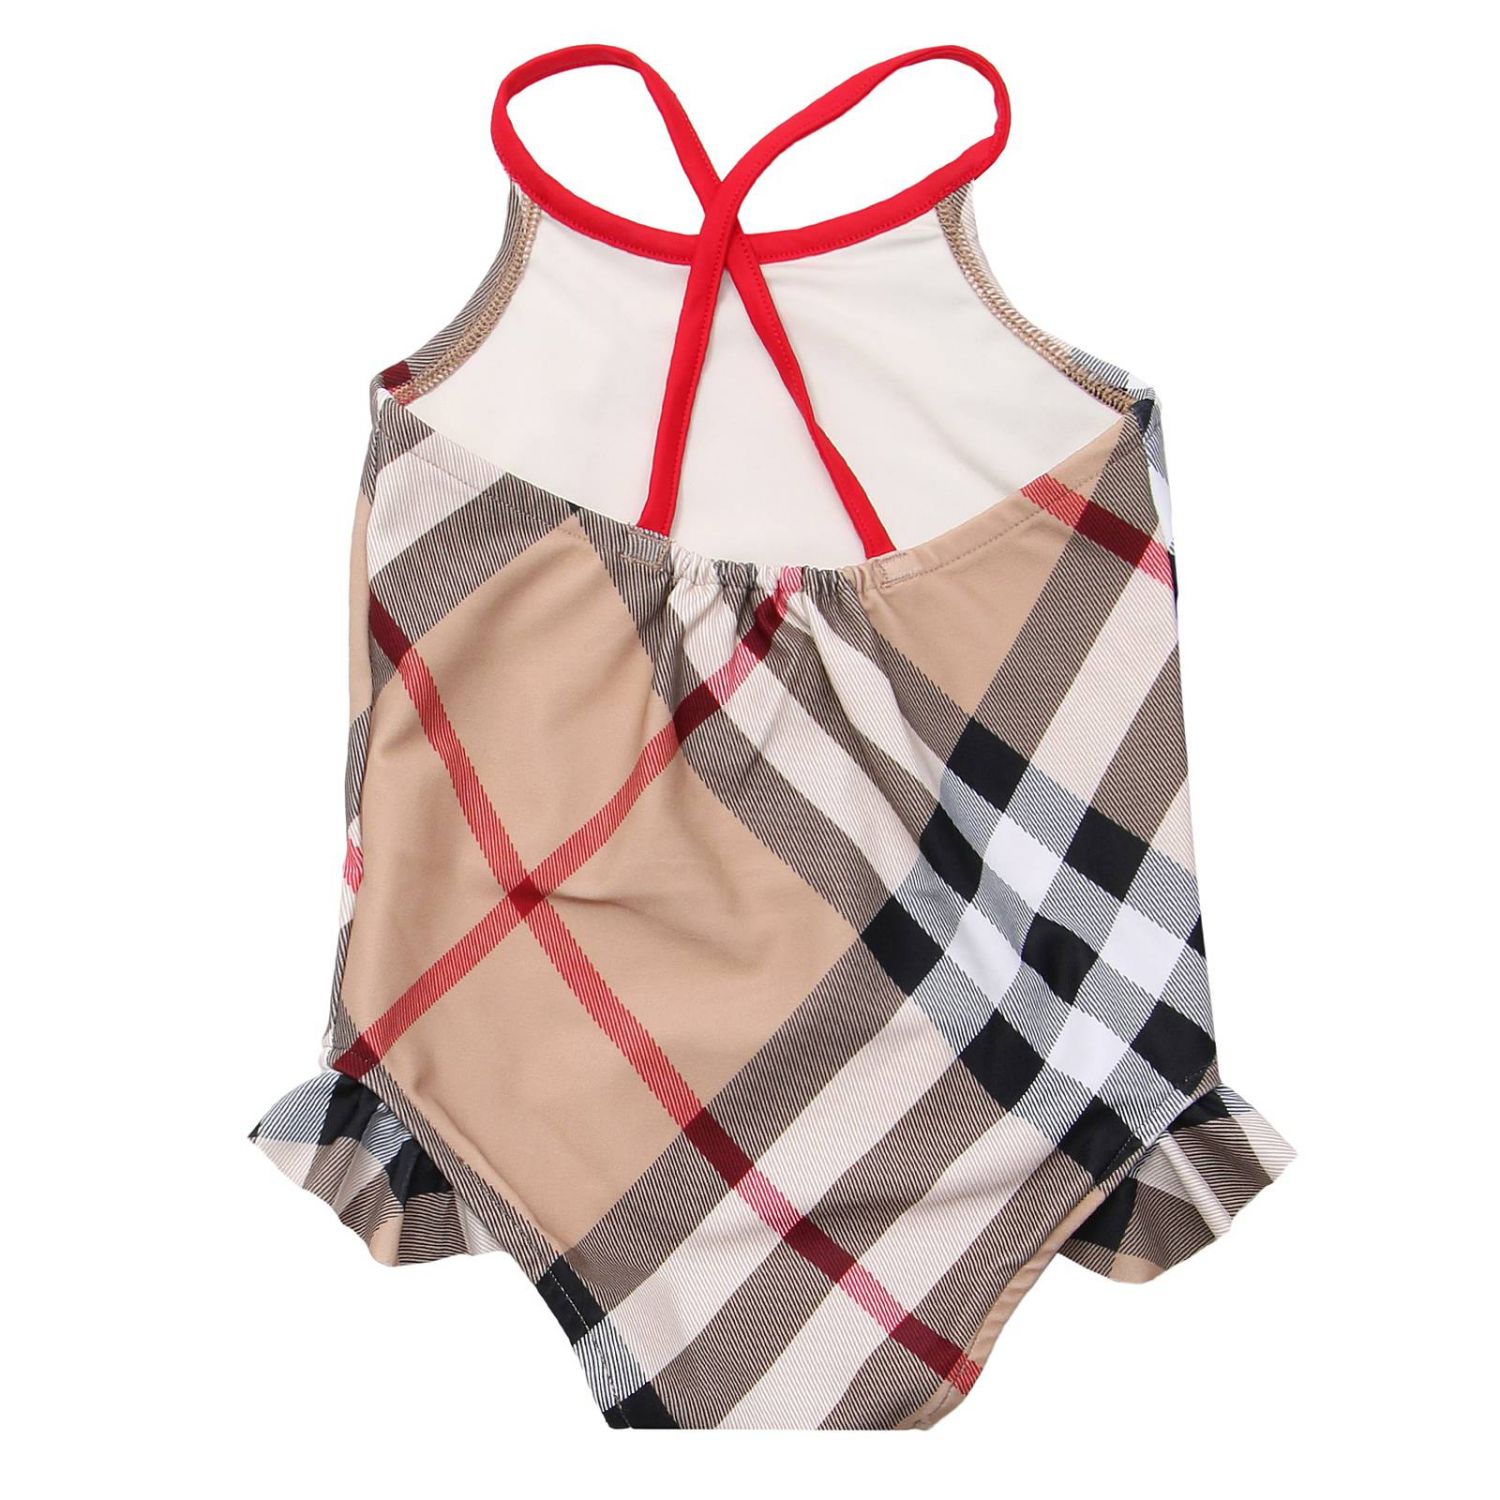 Burberry Layette Outlet: Swimsuit kids | Swimsuit Burberry Layette Kids